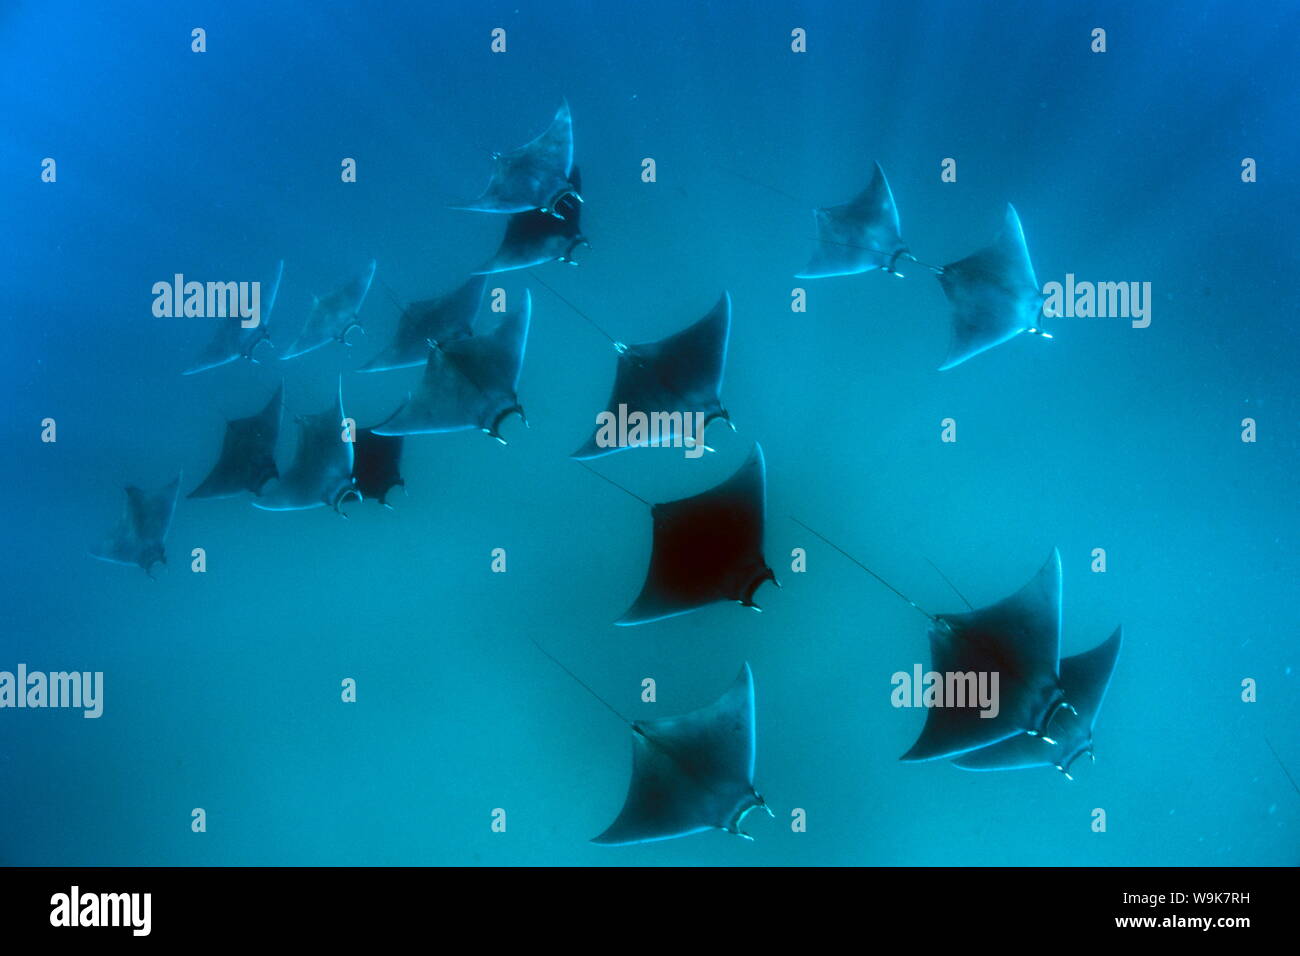 Eagle rays (Mobula hypostoma) common in this area and often seen in large groups, Yum Balam Marine Protected Area, Quintana Roo, Mexico Stock Photo